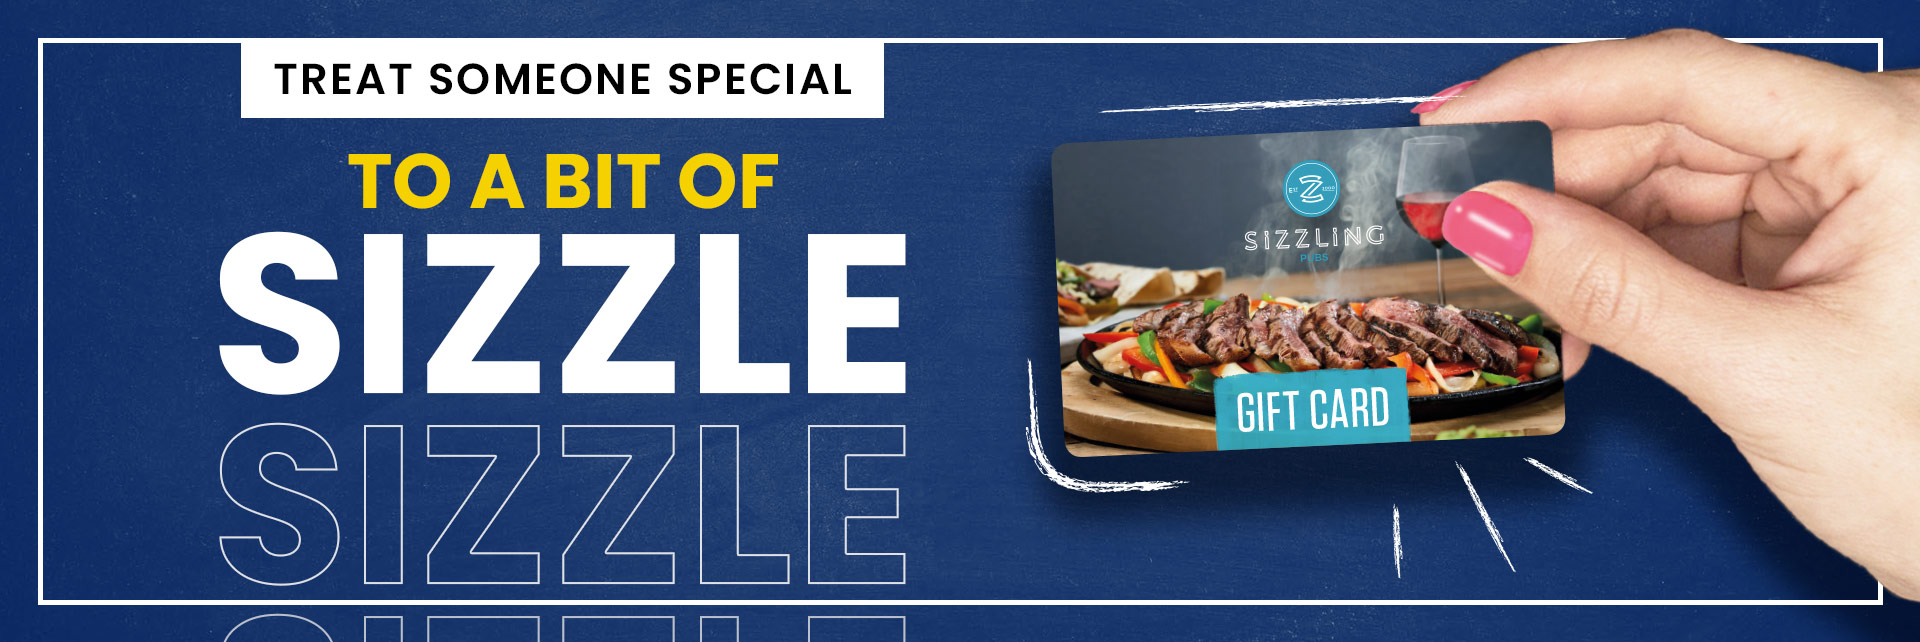 Sizzling Pubs Gift Card at The Man on the Moon in Birmingham